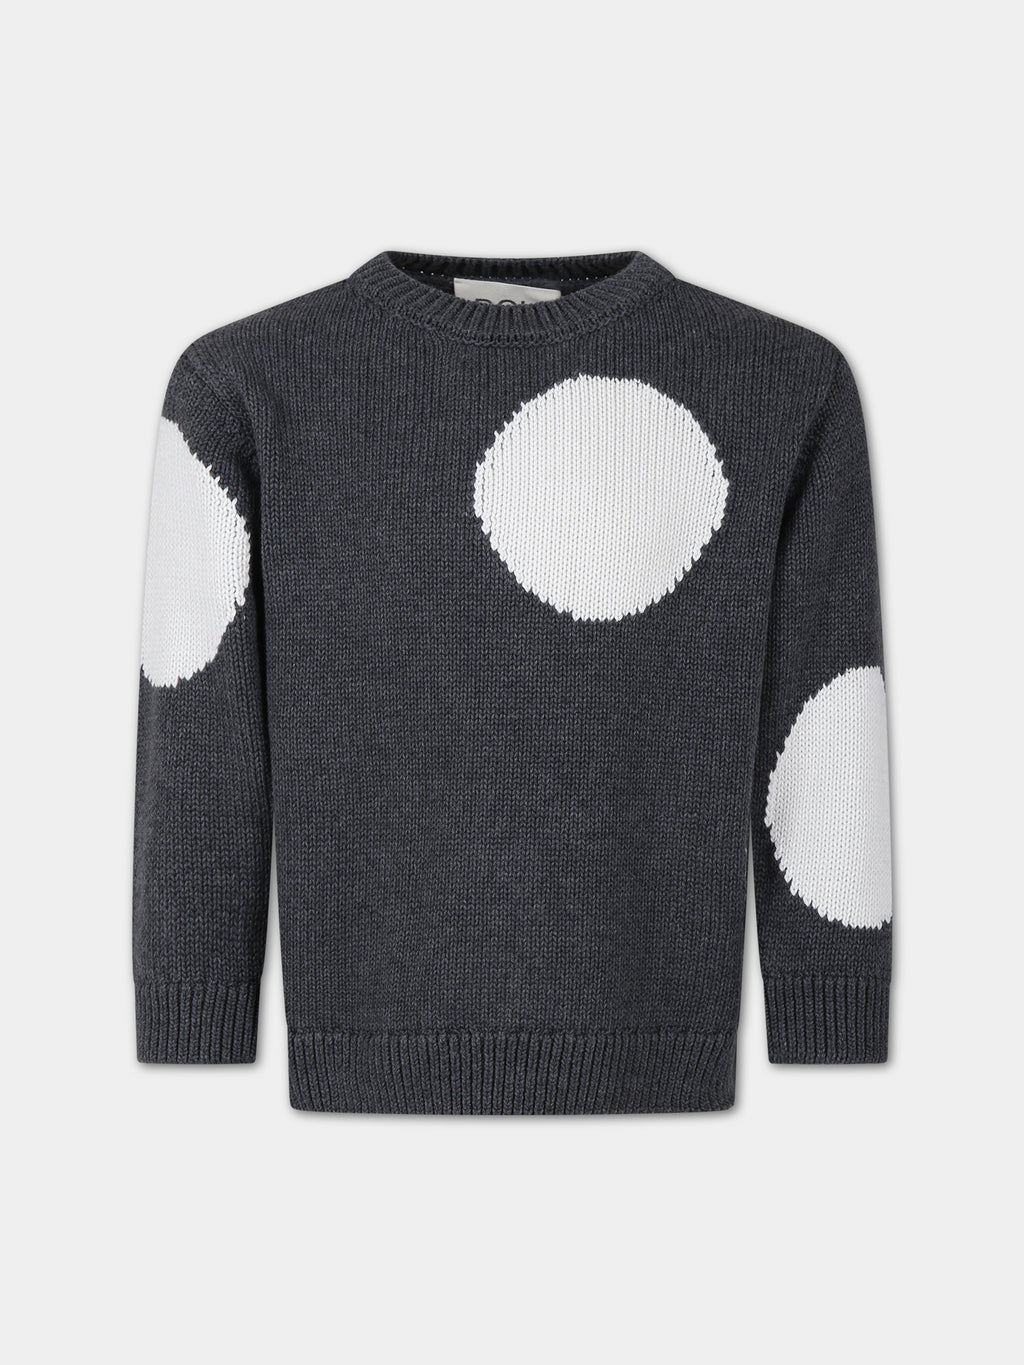 Gray sweater for girl with white polka dots